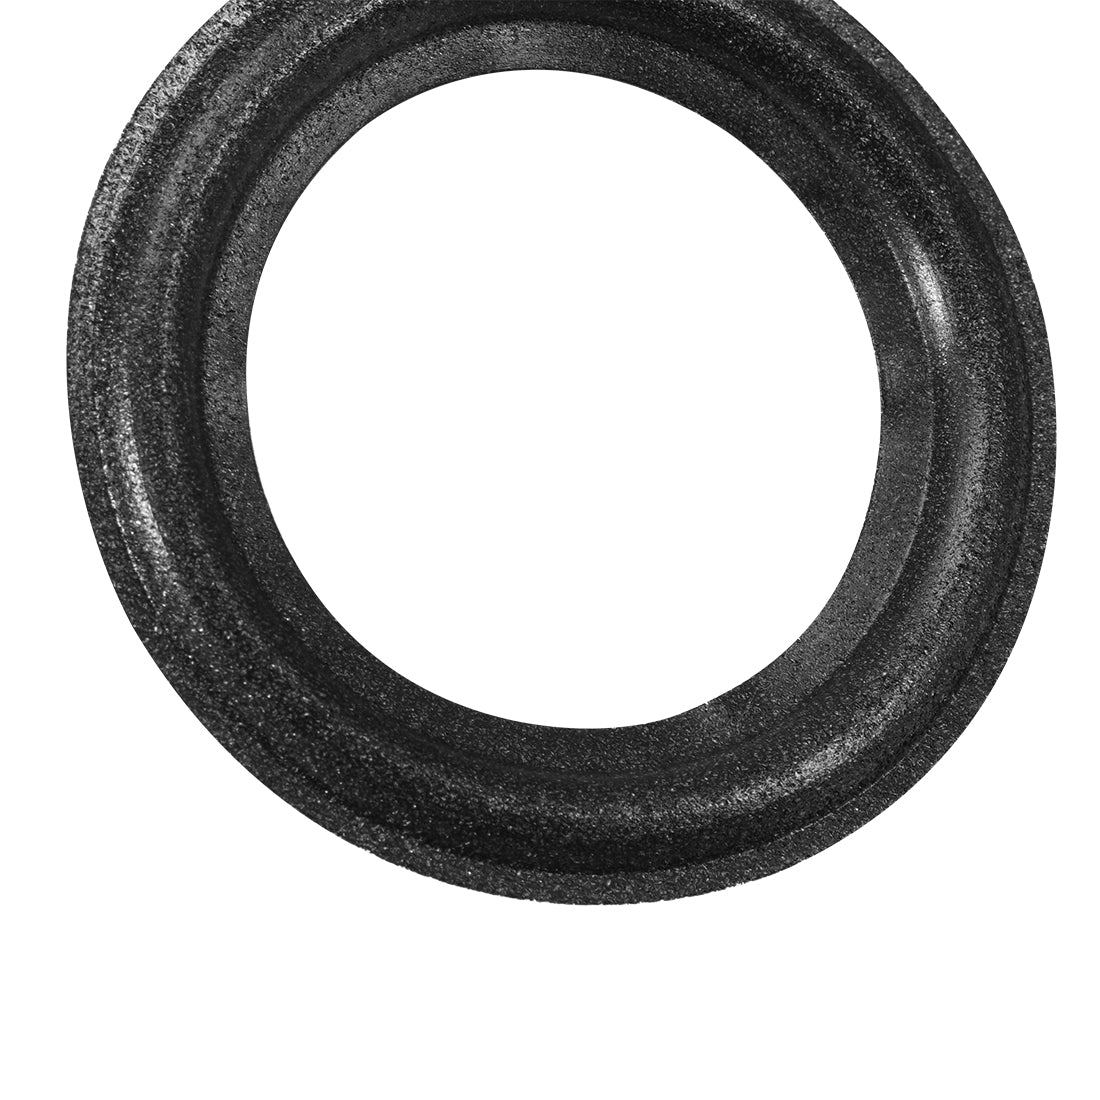 uxcell Uxcell 2"  2 inches Speaker Foam Edge Surround Rings Replacement Parts for Speaker Repair or DIY 2pcs